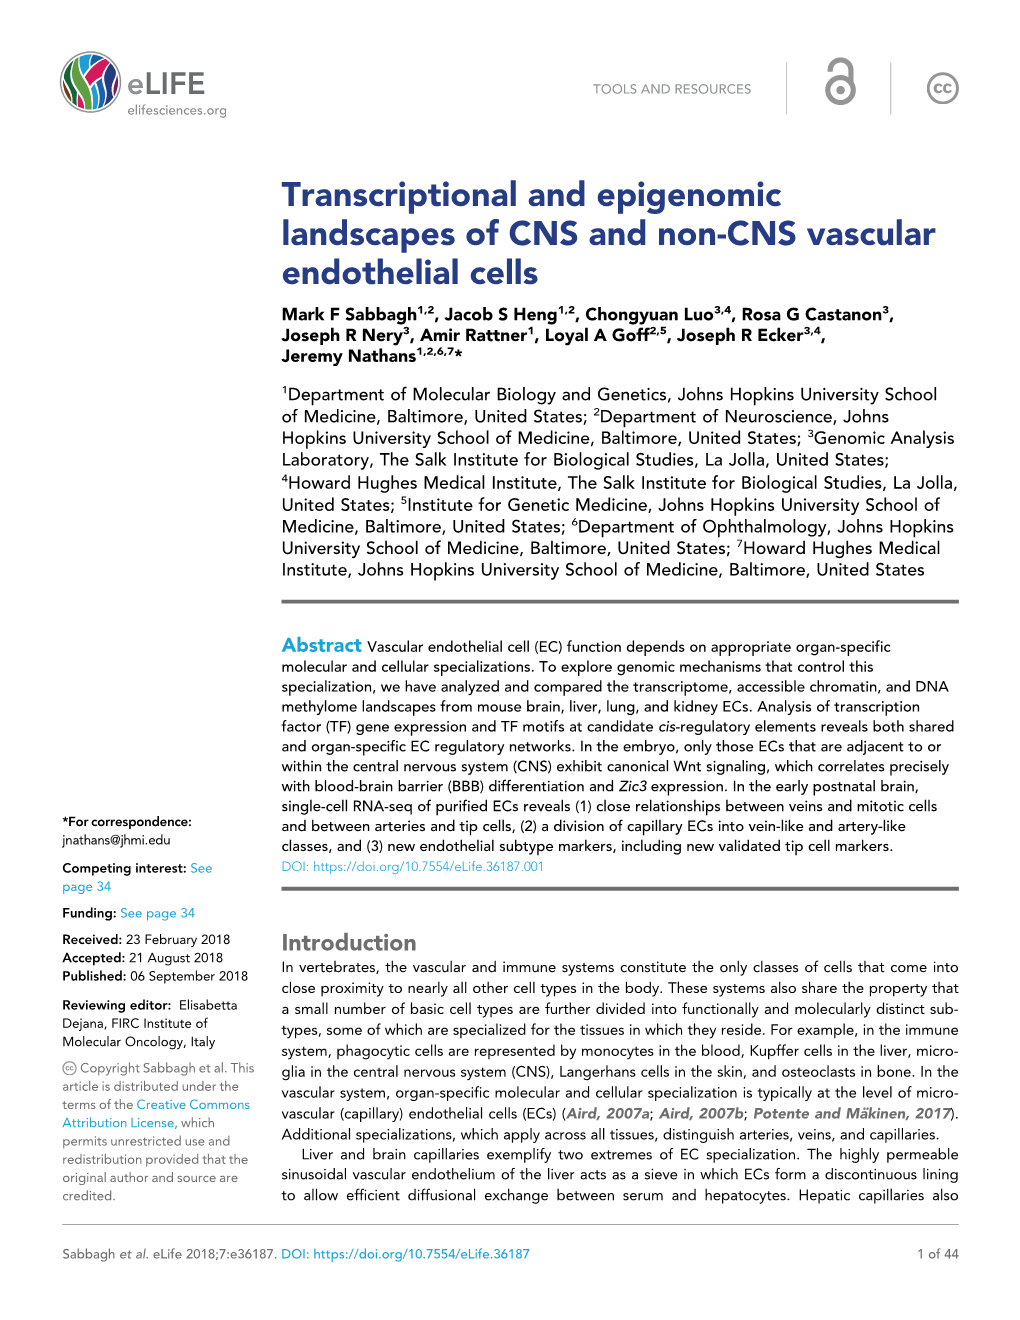 Transcriptional and Epigenomic Landscapes of CNS and Non